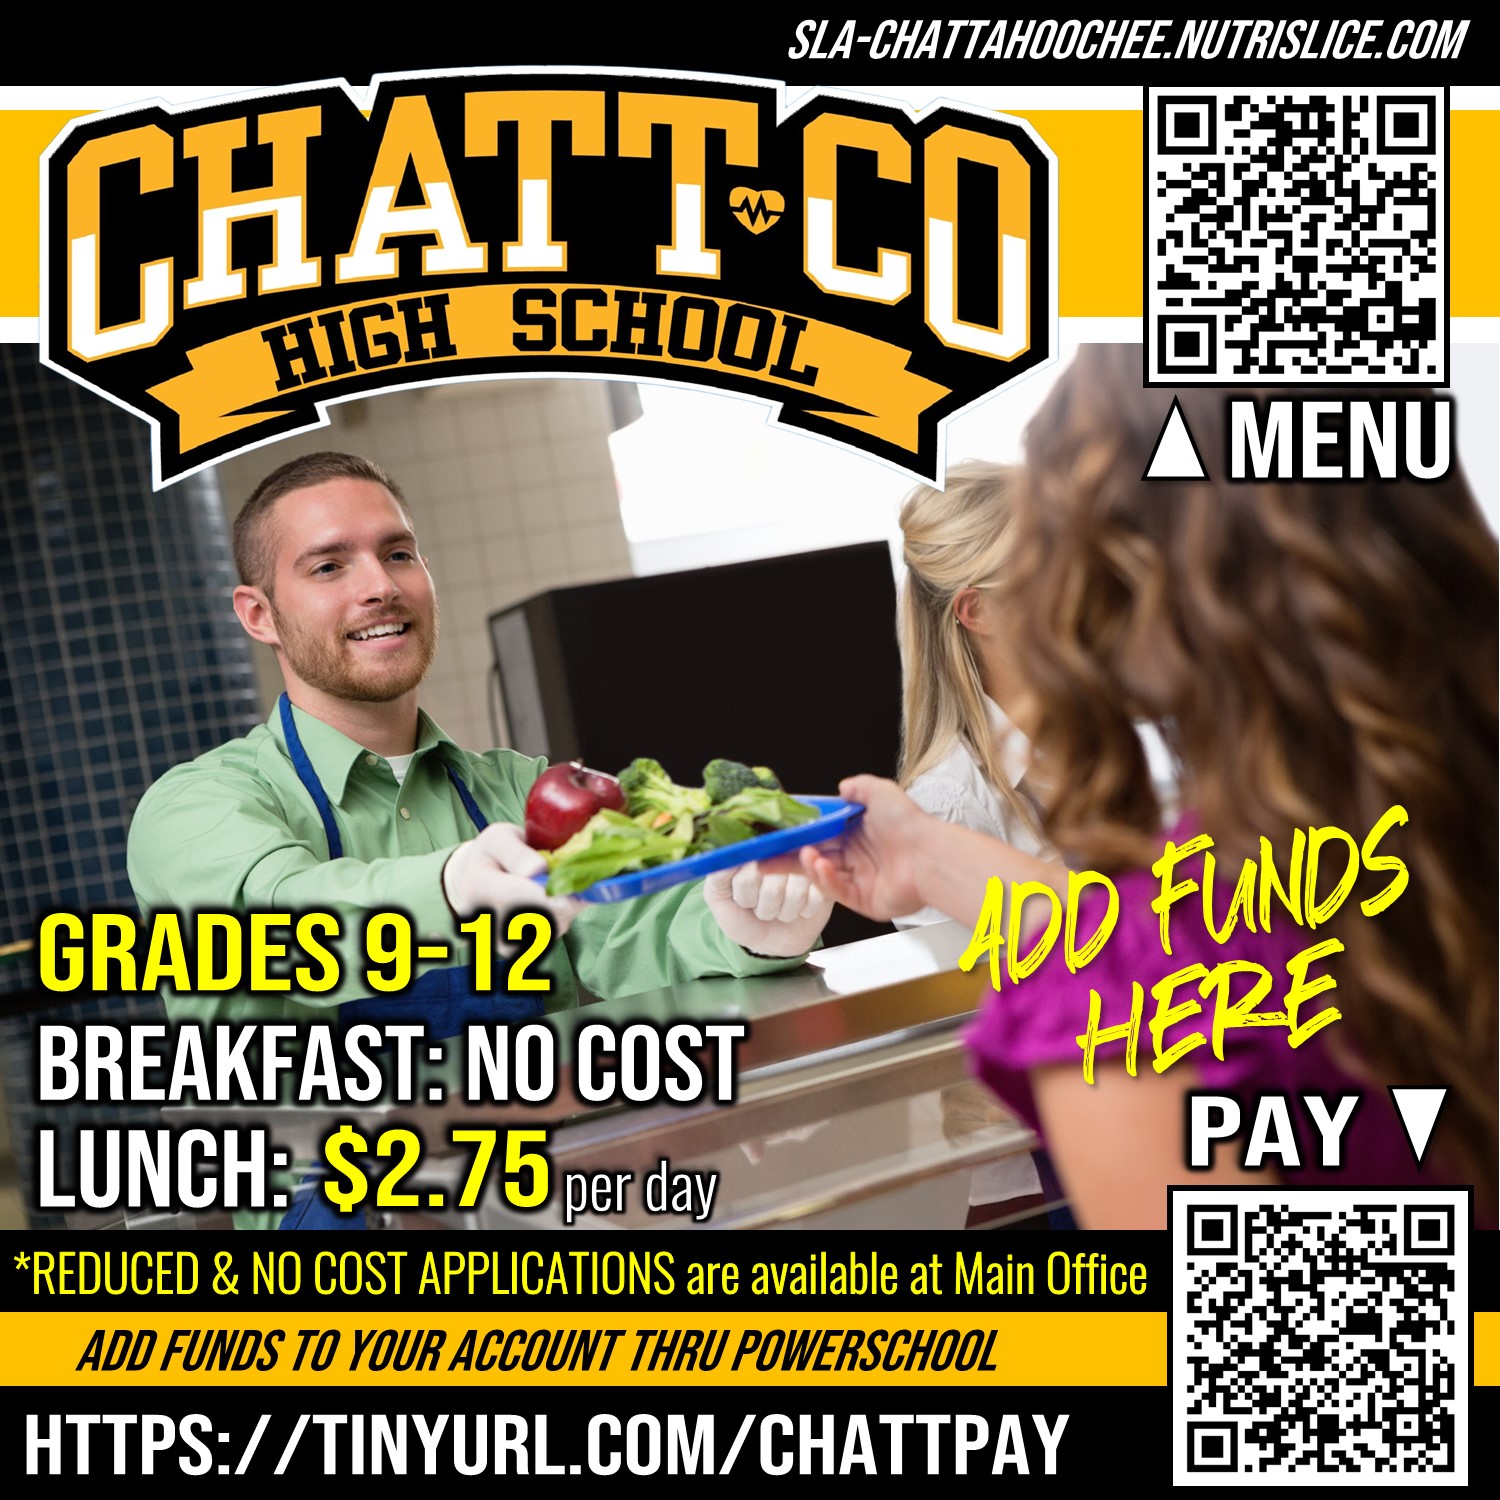 sla-chattahoochee.nutrislice.com MENU  GRADES 9-12 BREAKFAST: NO COST  LUNCH: $2.75 PER DAY *REDUCED & NO COST APPLICATIONS ARE AVAILABLE AT MAIN OFFICE ADD FUNDS TO YOUR ACCOUNT THRU POWERSCHOOL HTTPS?//TINYURL.COM/CHATTPAY